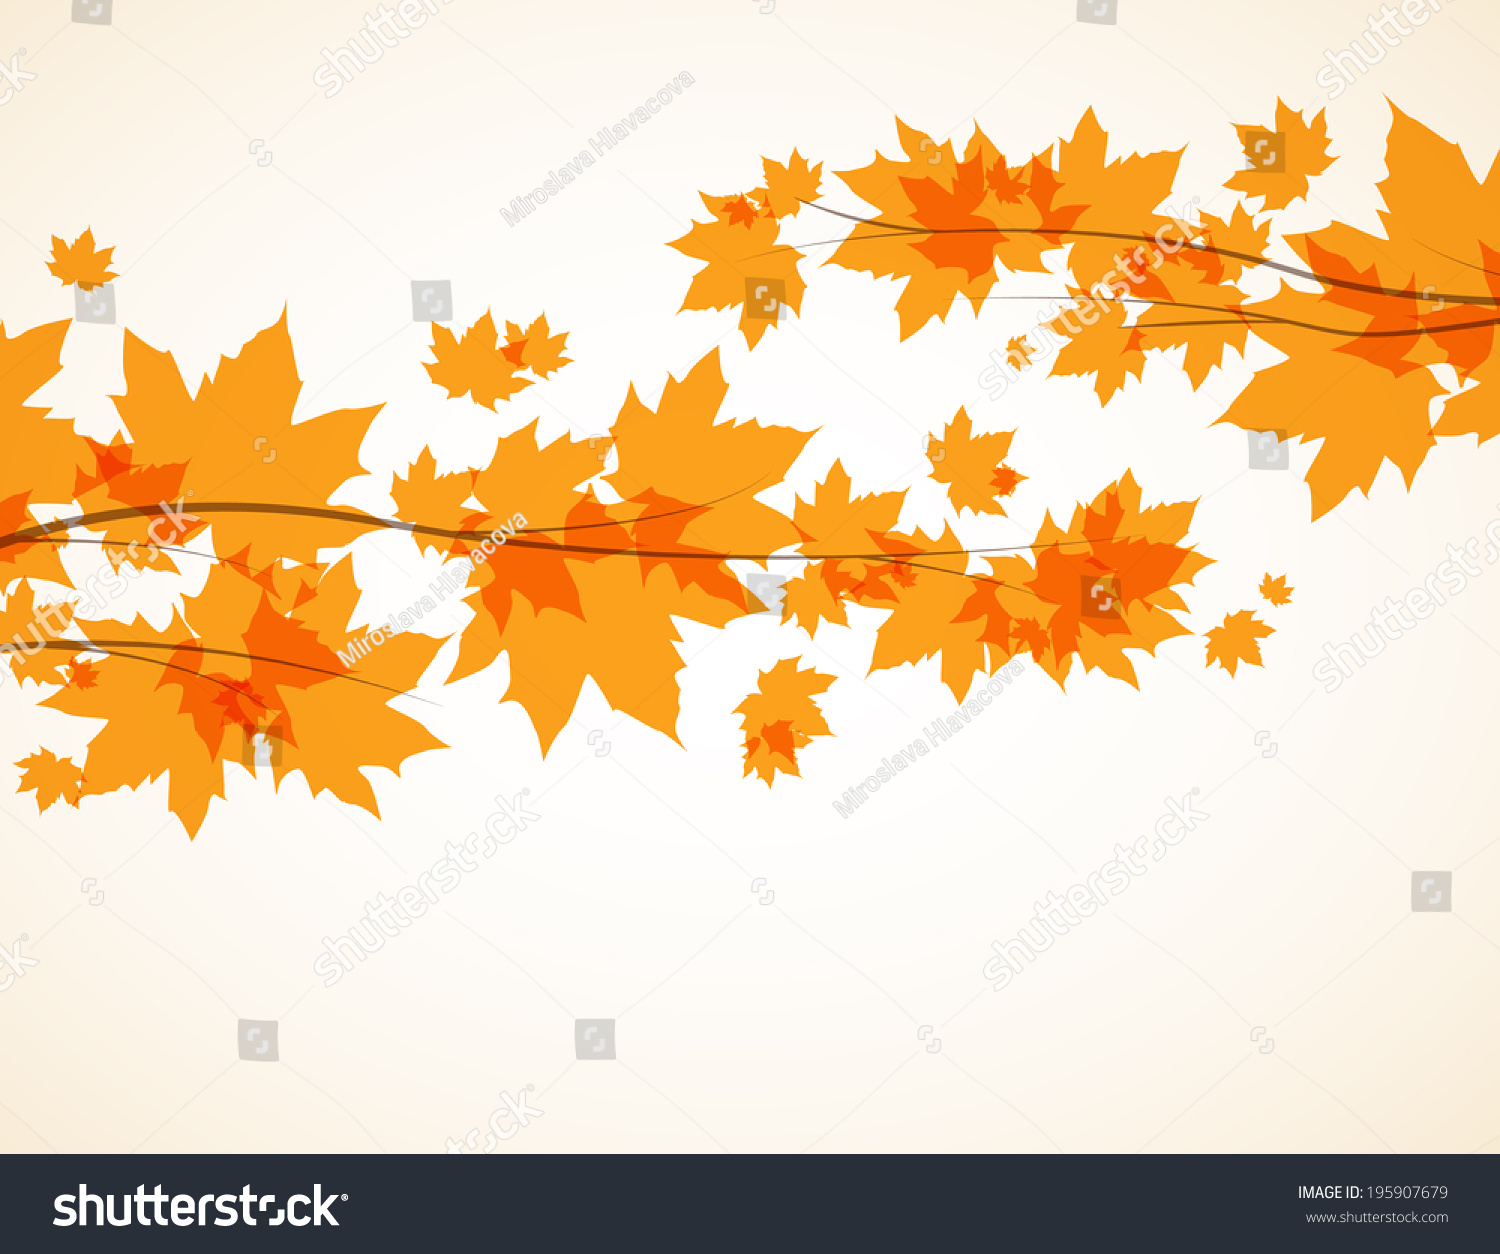 Branch With Autumn Leaves Vector Background - 195907679 : Shutterstock